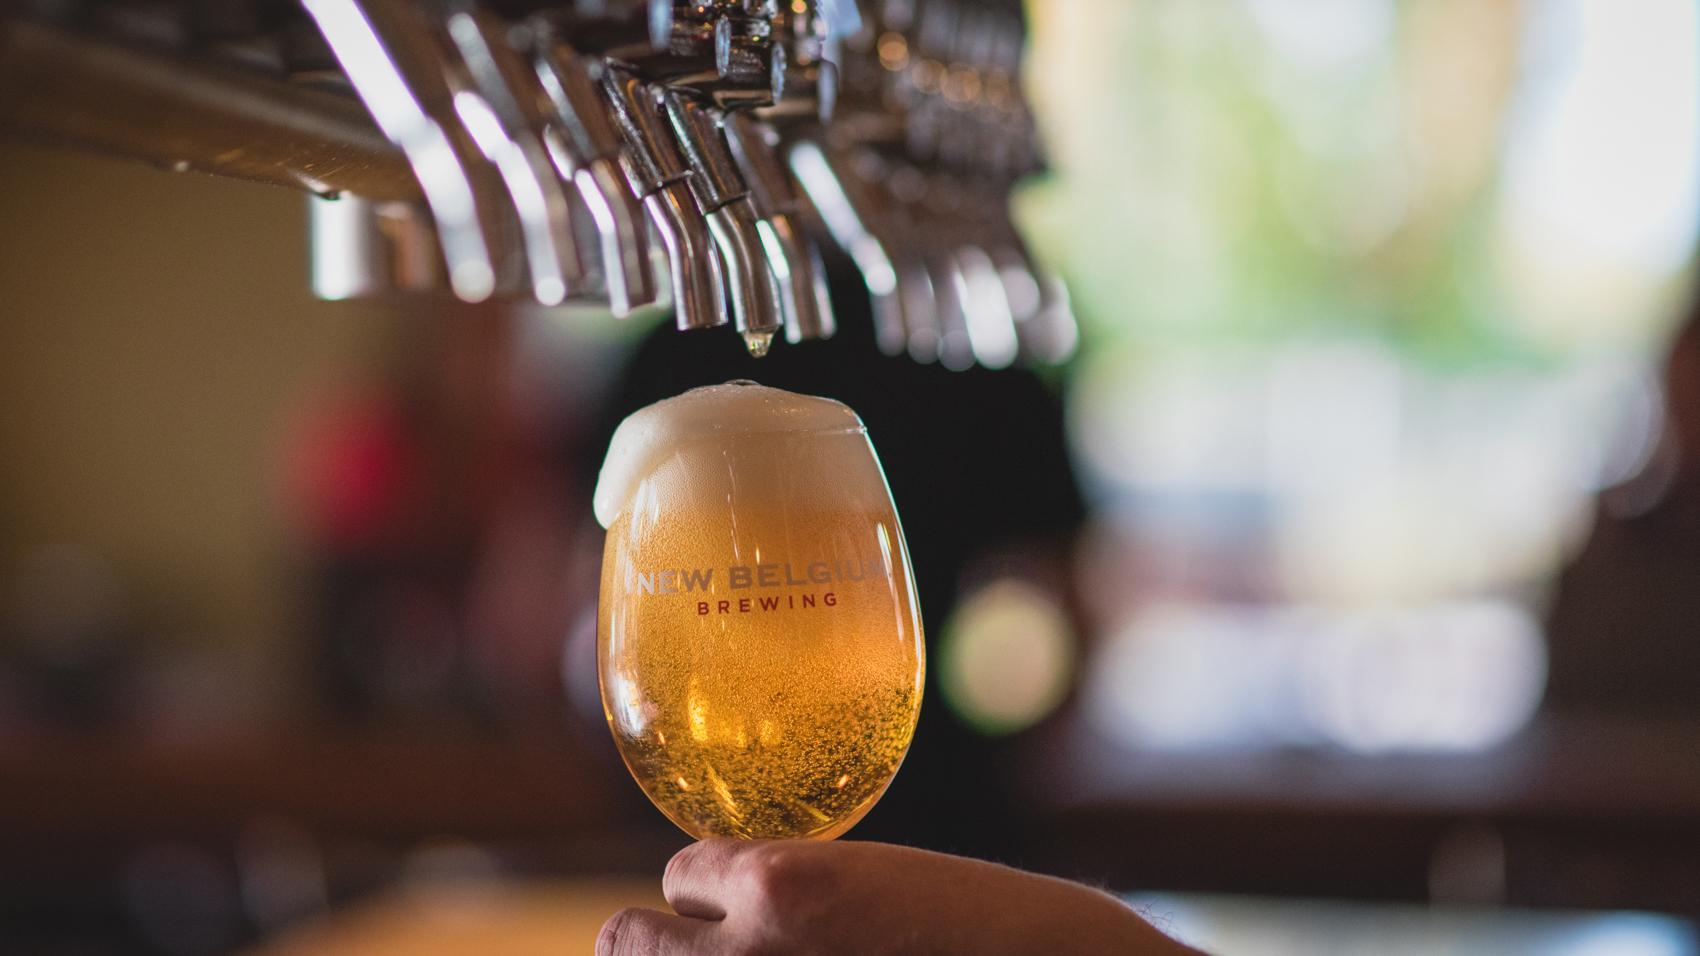 The New Belgium Brewing Company is the 4th largest craft brewer in the US. Their beers are in demand across the globe, but the company is hesitant to expand exports too quickly. 